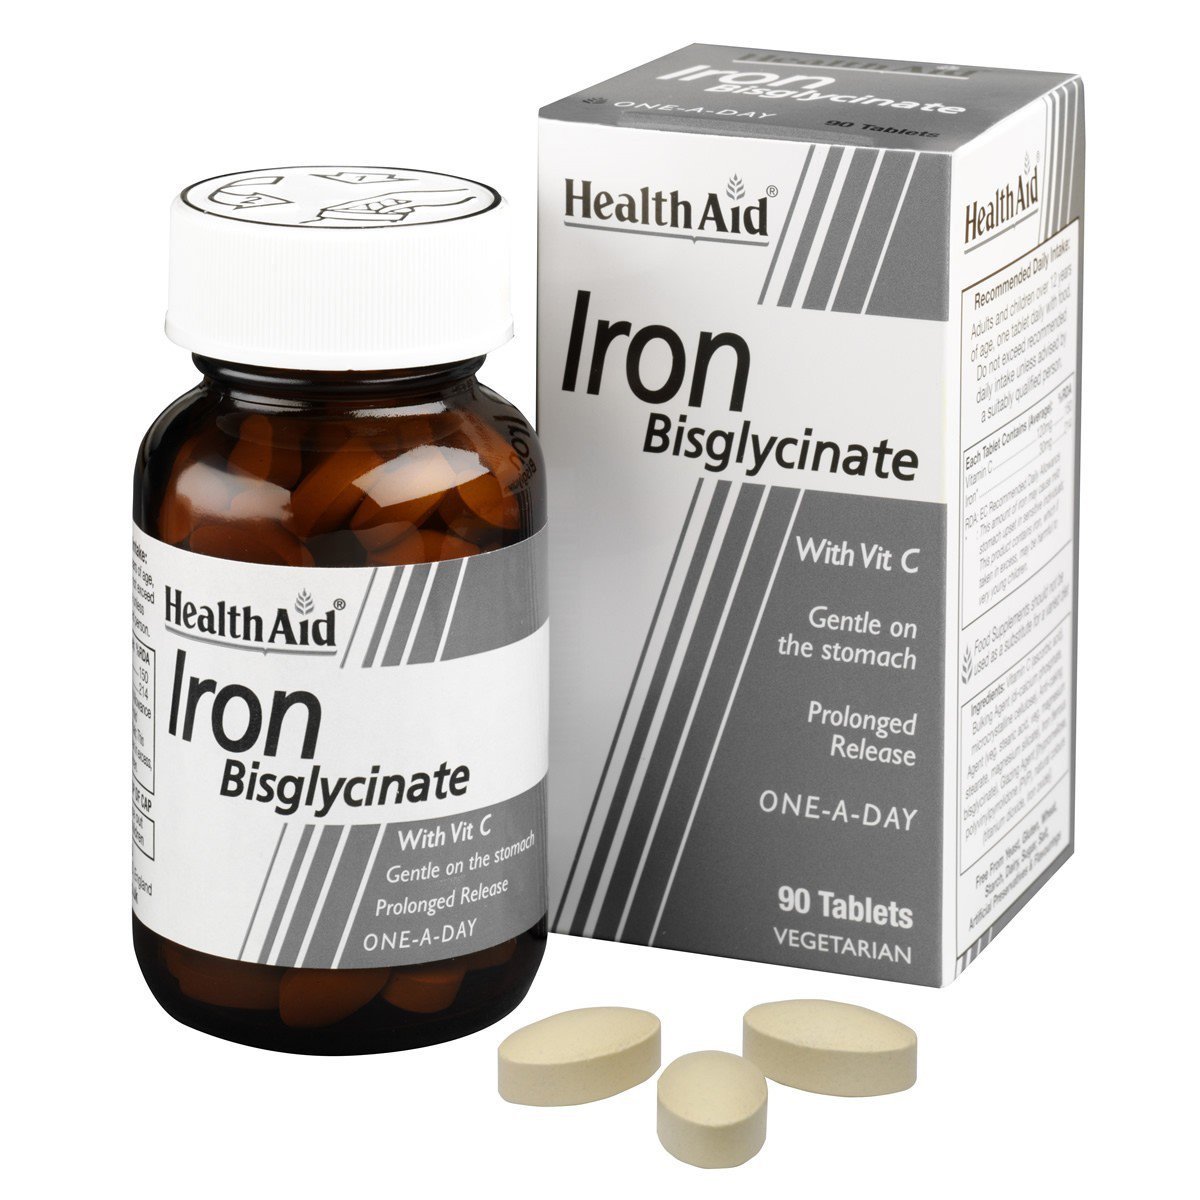 Health Aid Iron Bisglycinate Σίδηρος Δισγλυκινικός 90 tabs